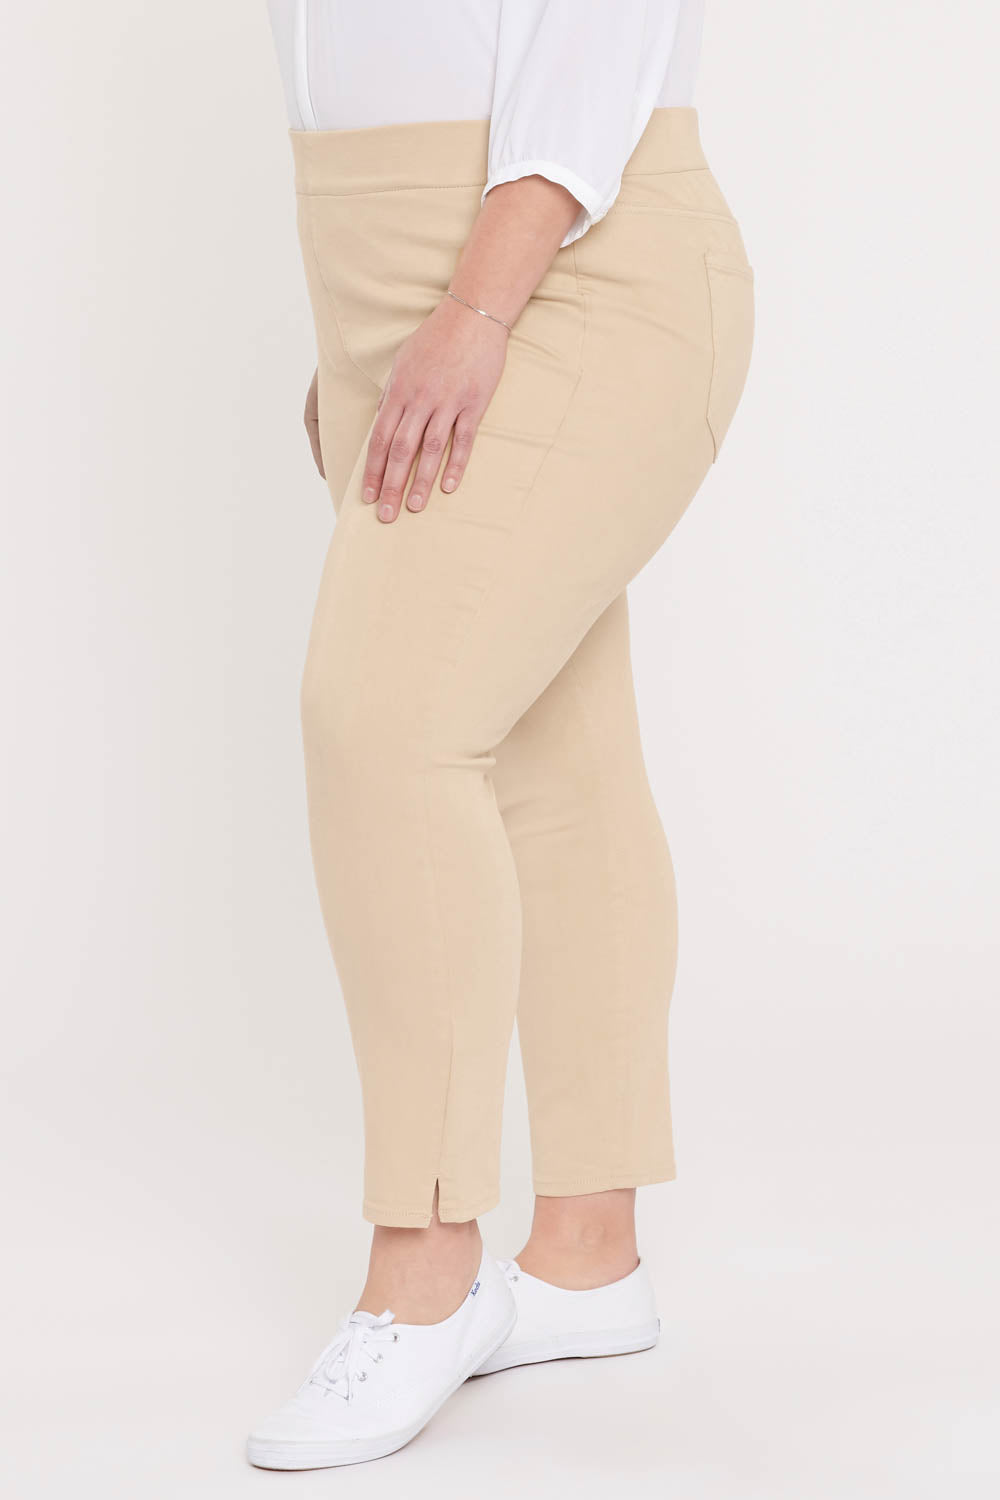 NYDJ Skinny Ankle Pull-On Jeans In Plus Size With Side Slits - Marisol Warm Sand